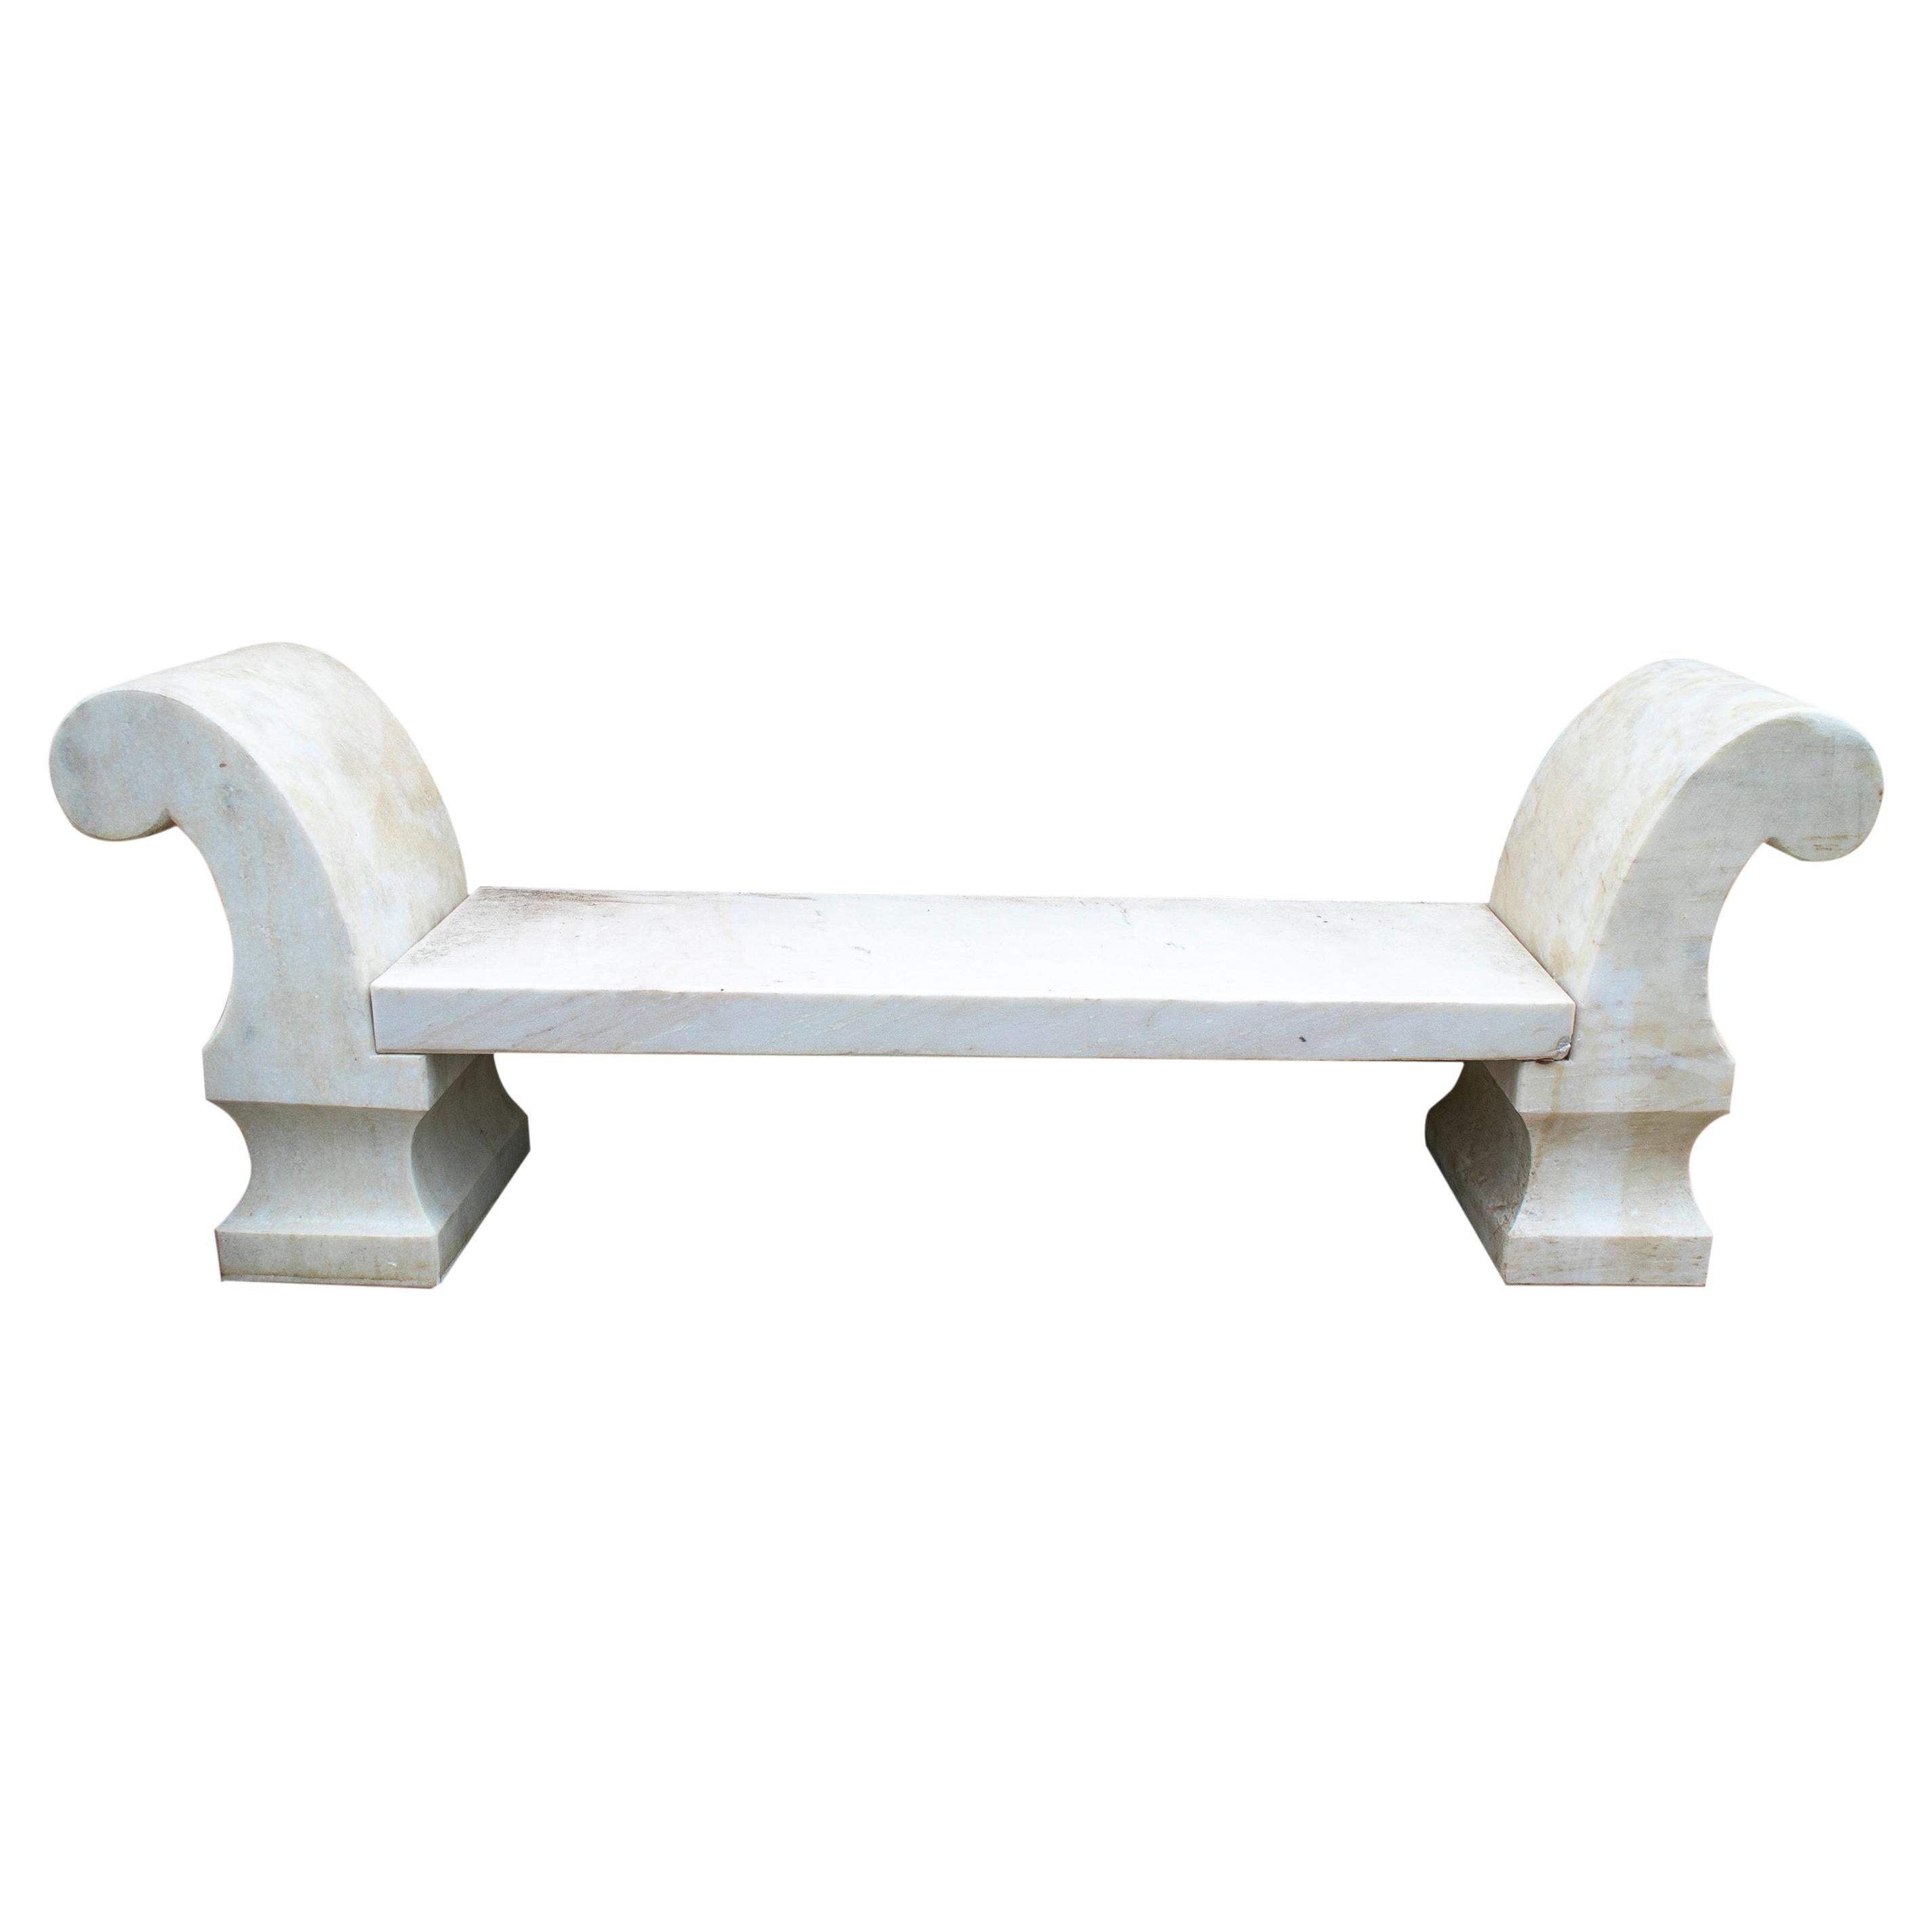 1990s Spanish Aged White Macael Marble Classical Garden Bench